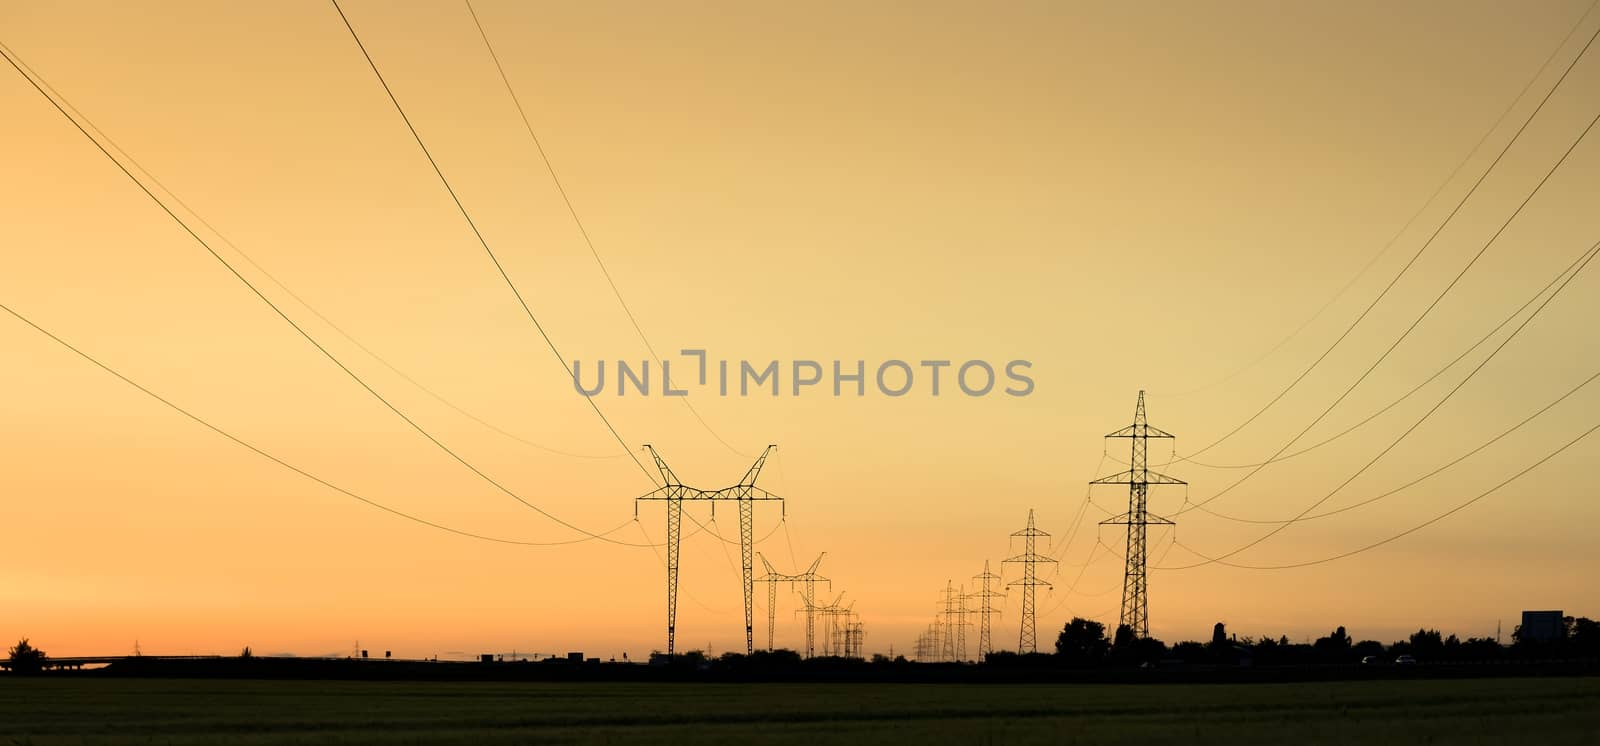 Large transmission towers at sunset with horizon